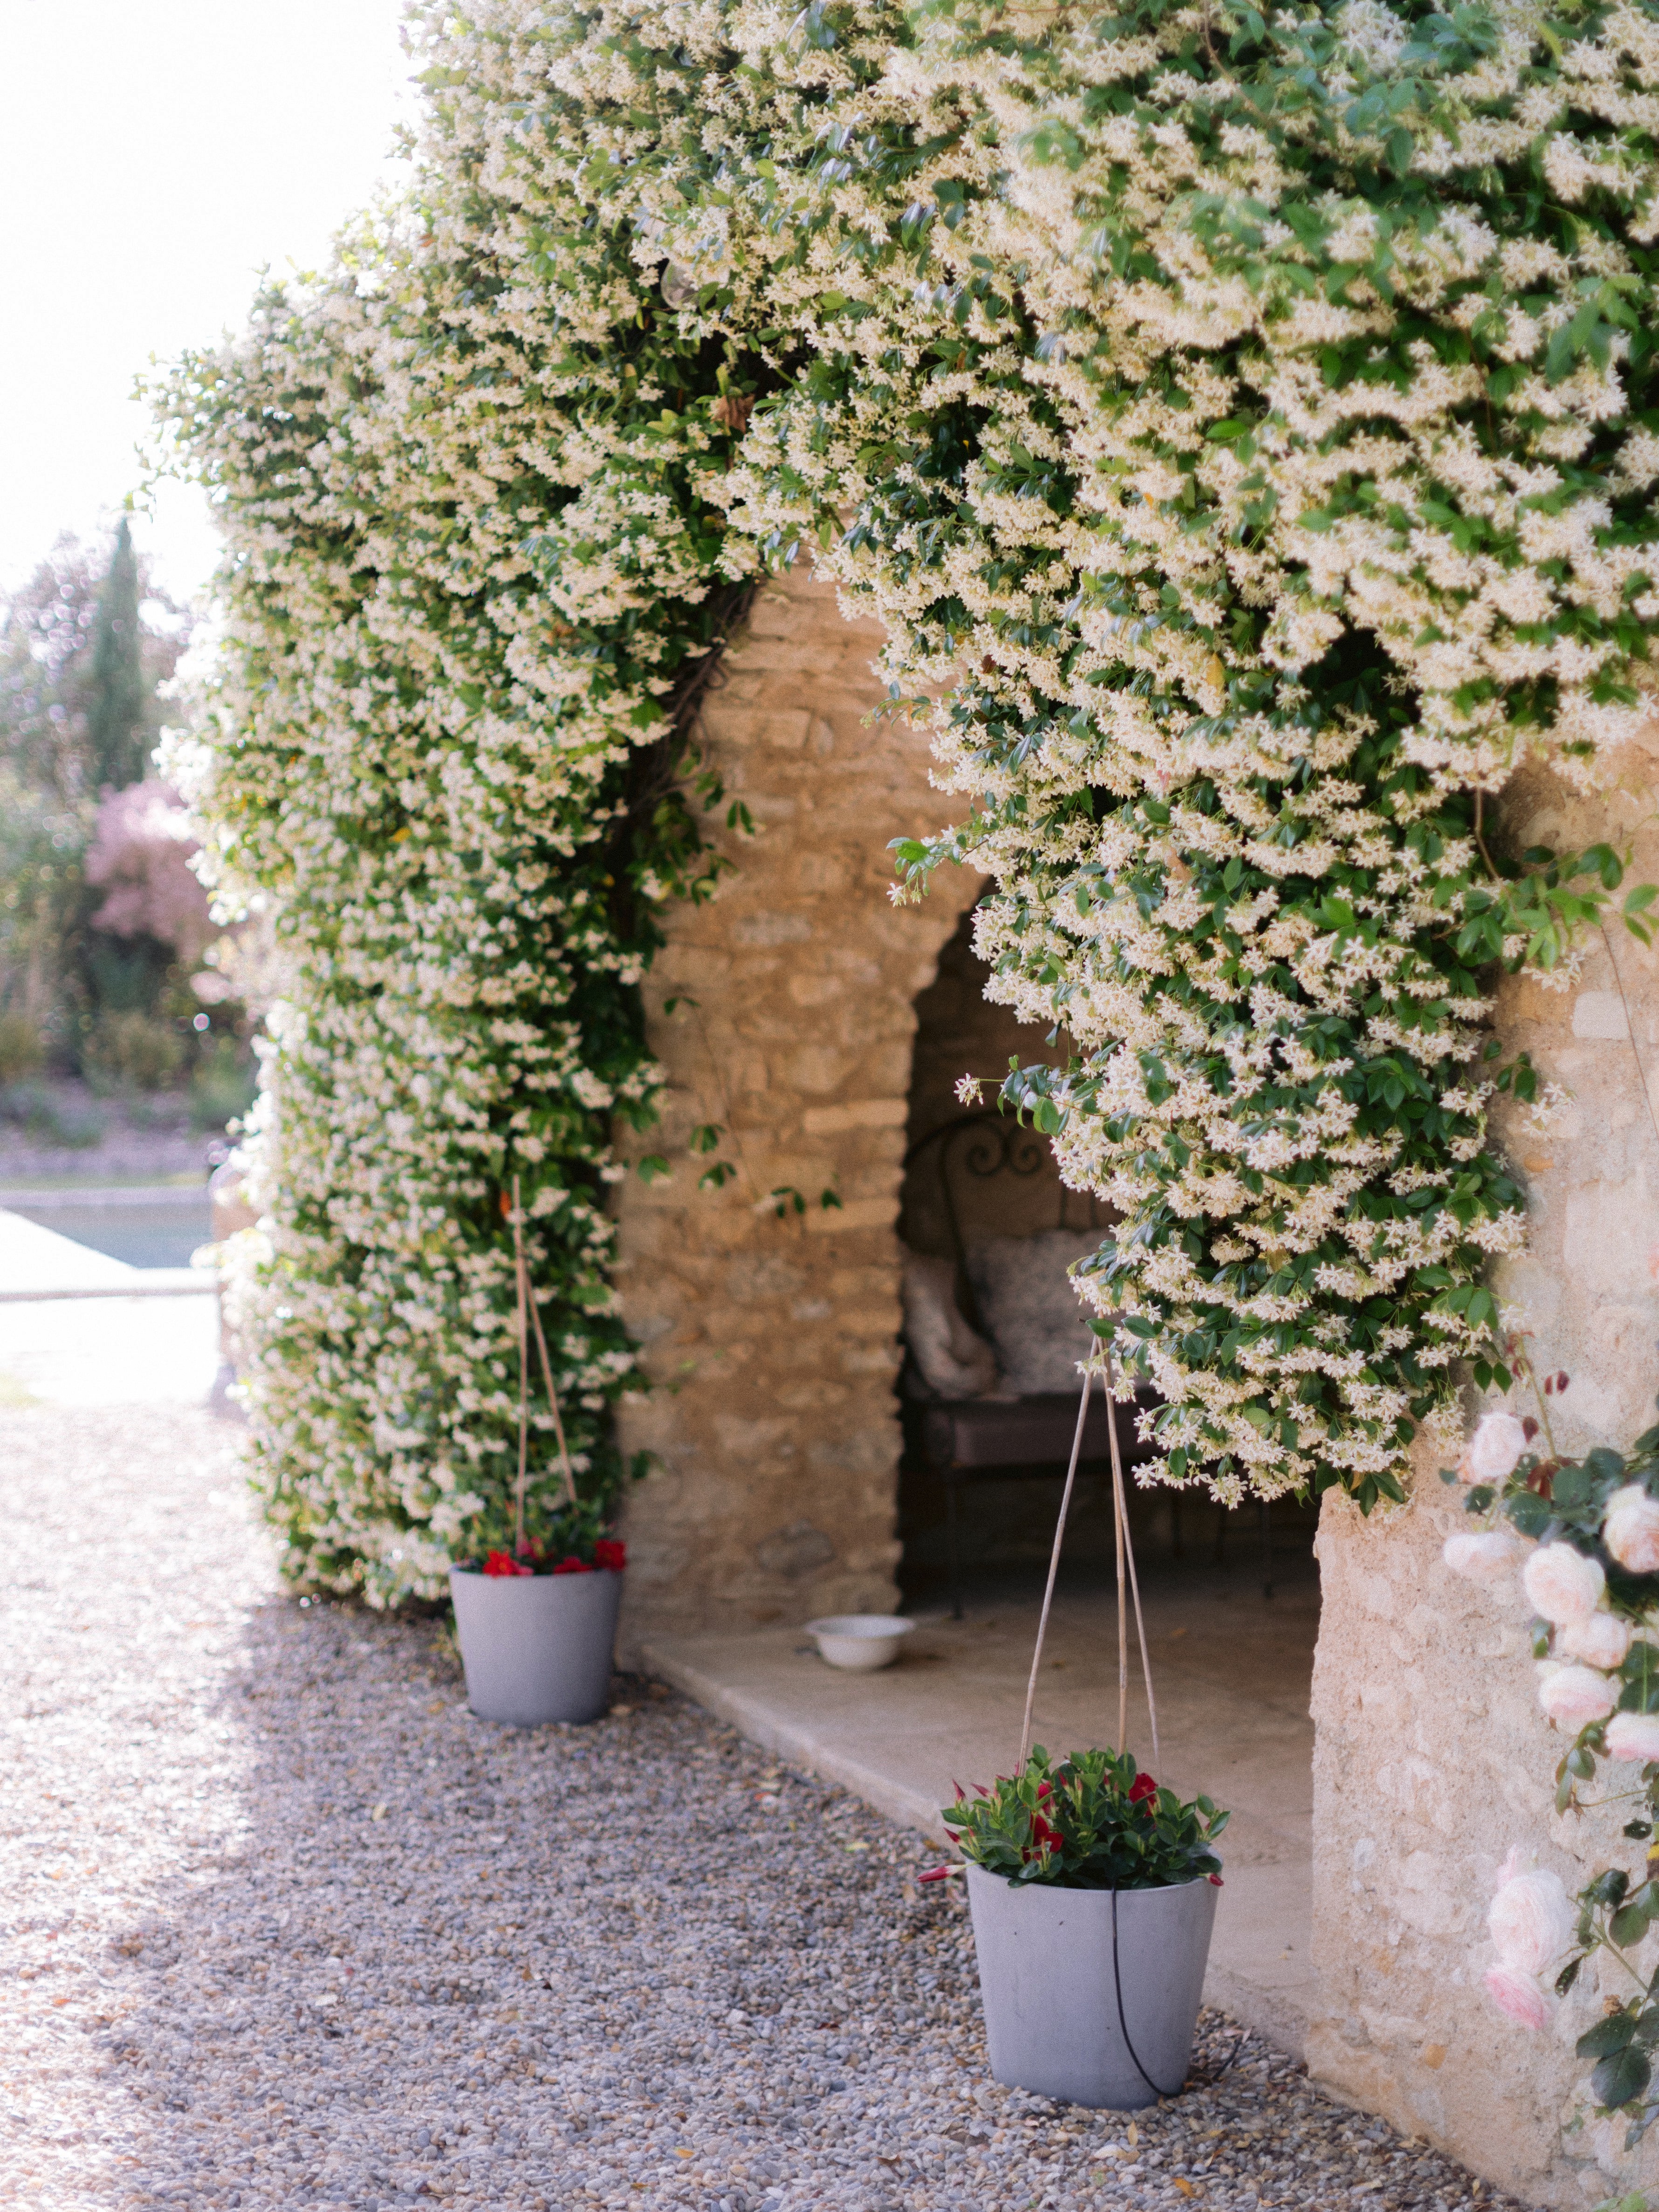 An enchanting stone archway covered in blooming white jasmine flowers, with two potted plants at its sides, leading to a quaint seating area.